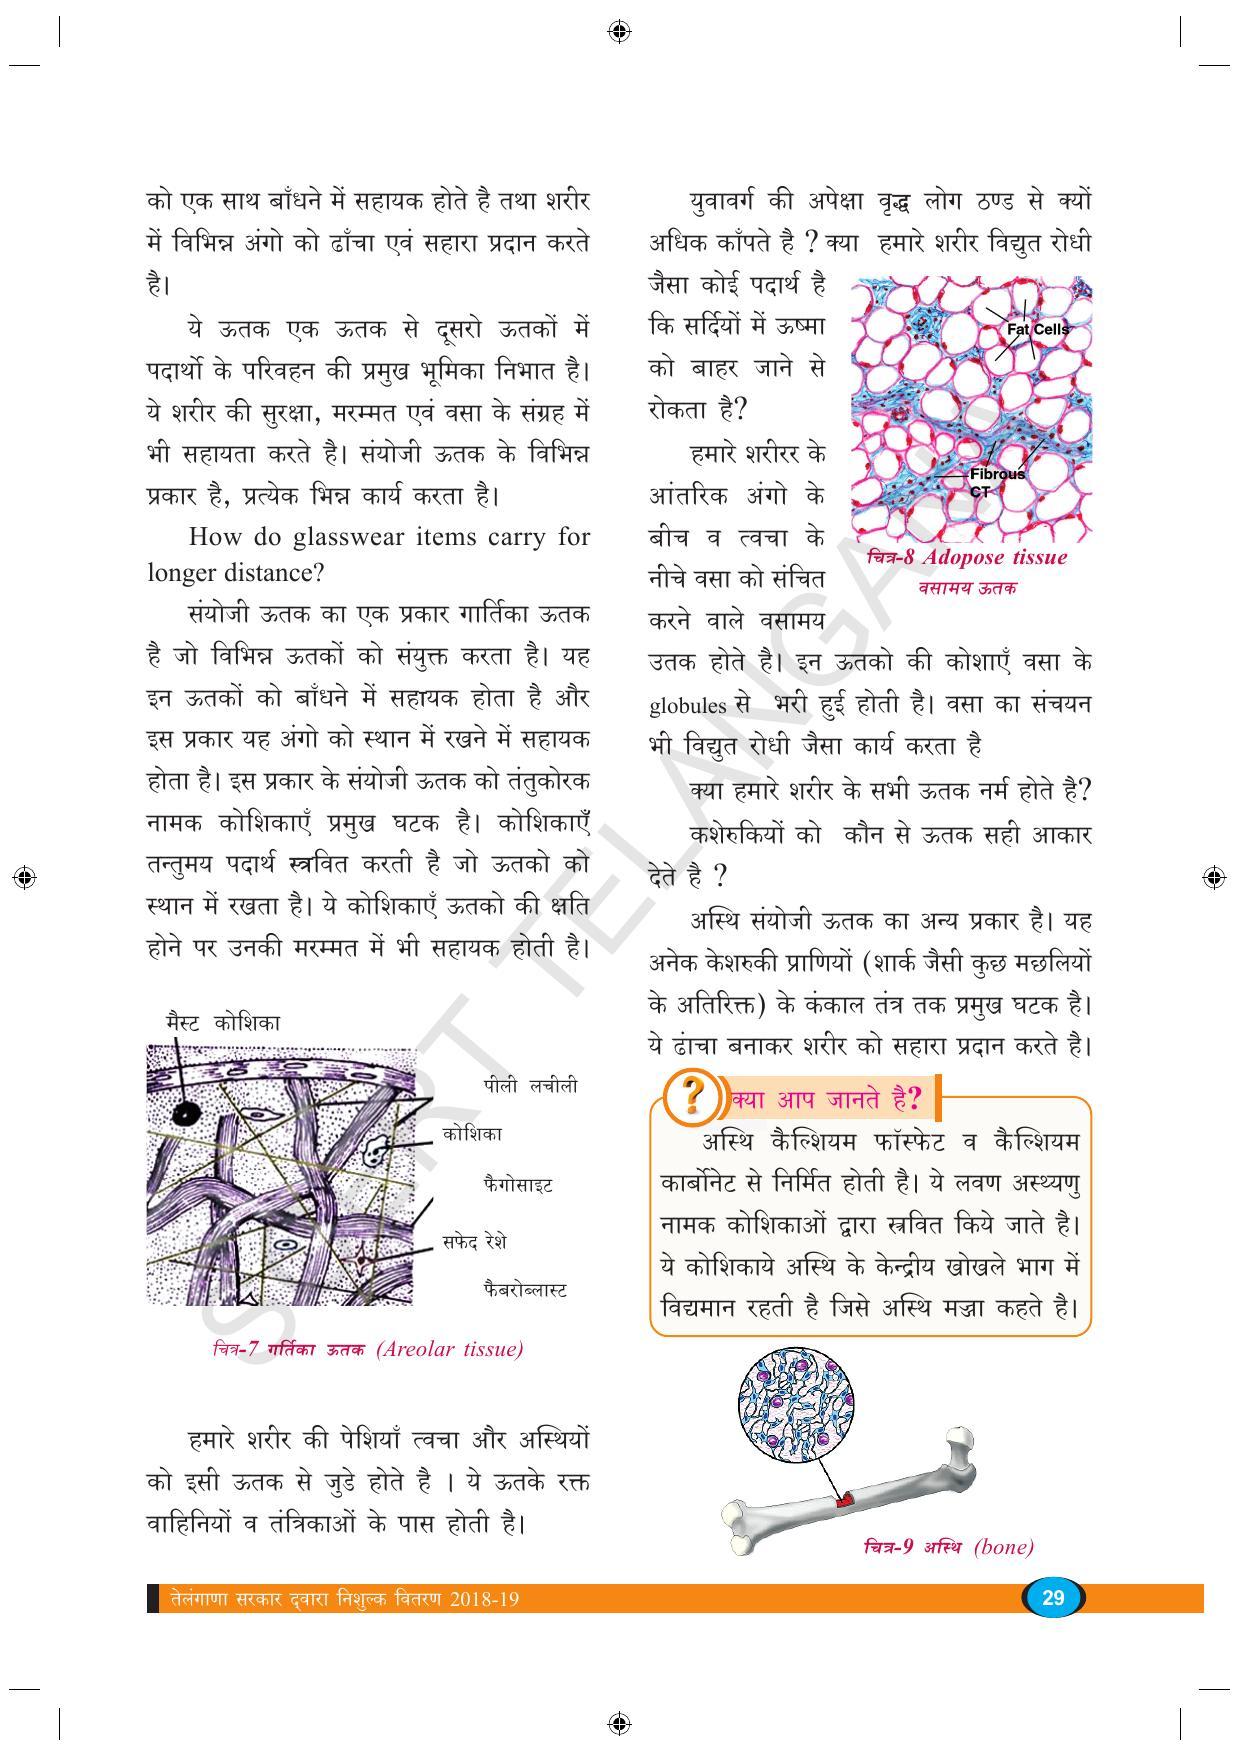 TS SCERT Class 9 Biological Science (Hindi Medium) Text Book - Page 41